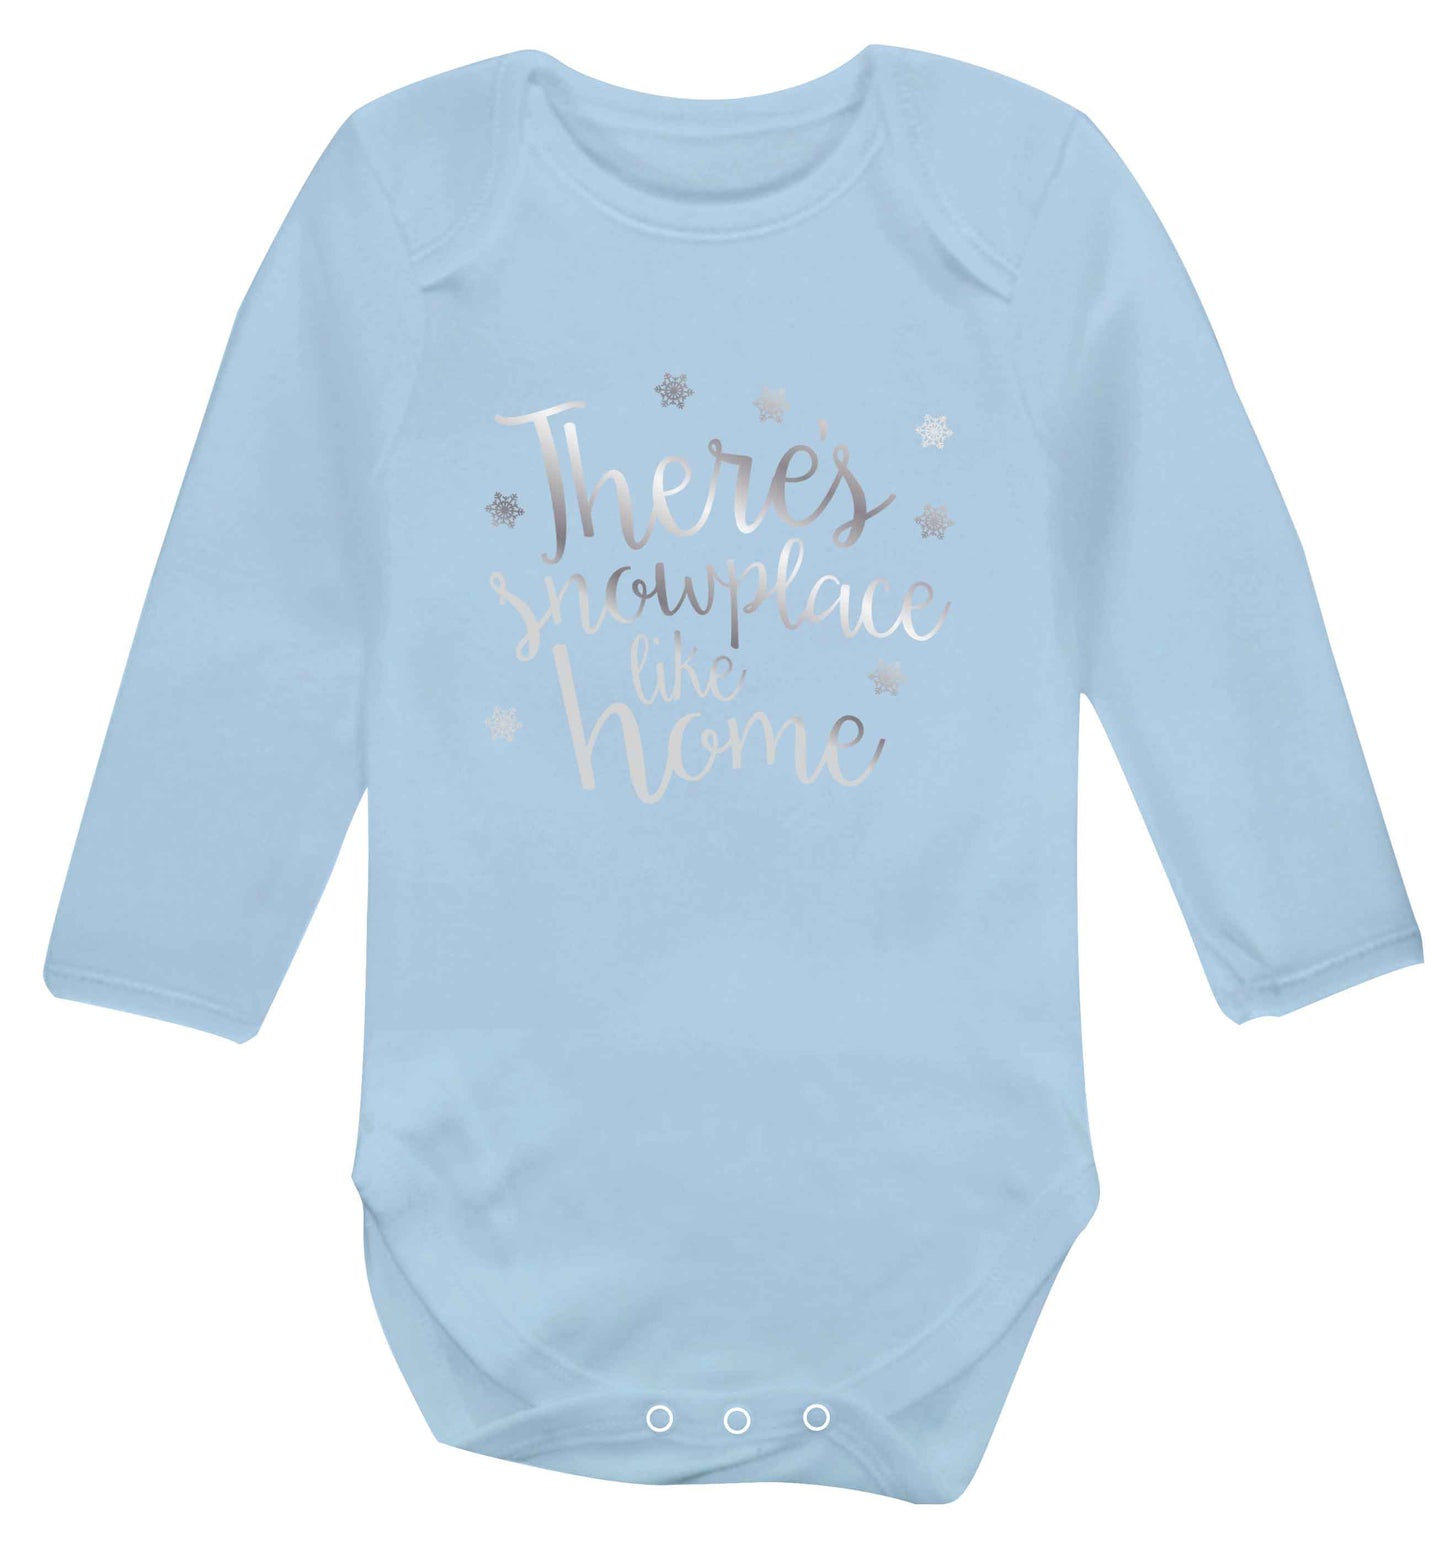 There's snowplace like home - metallic silver baby vest long sleeved pale blue 6-12 months